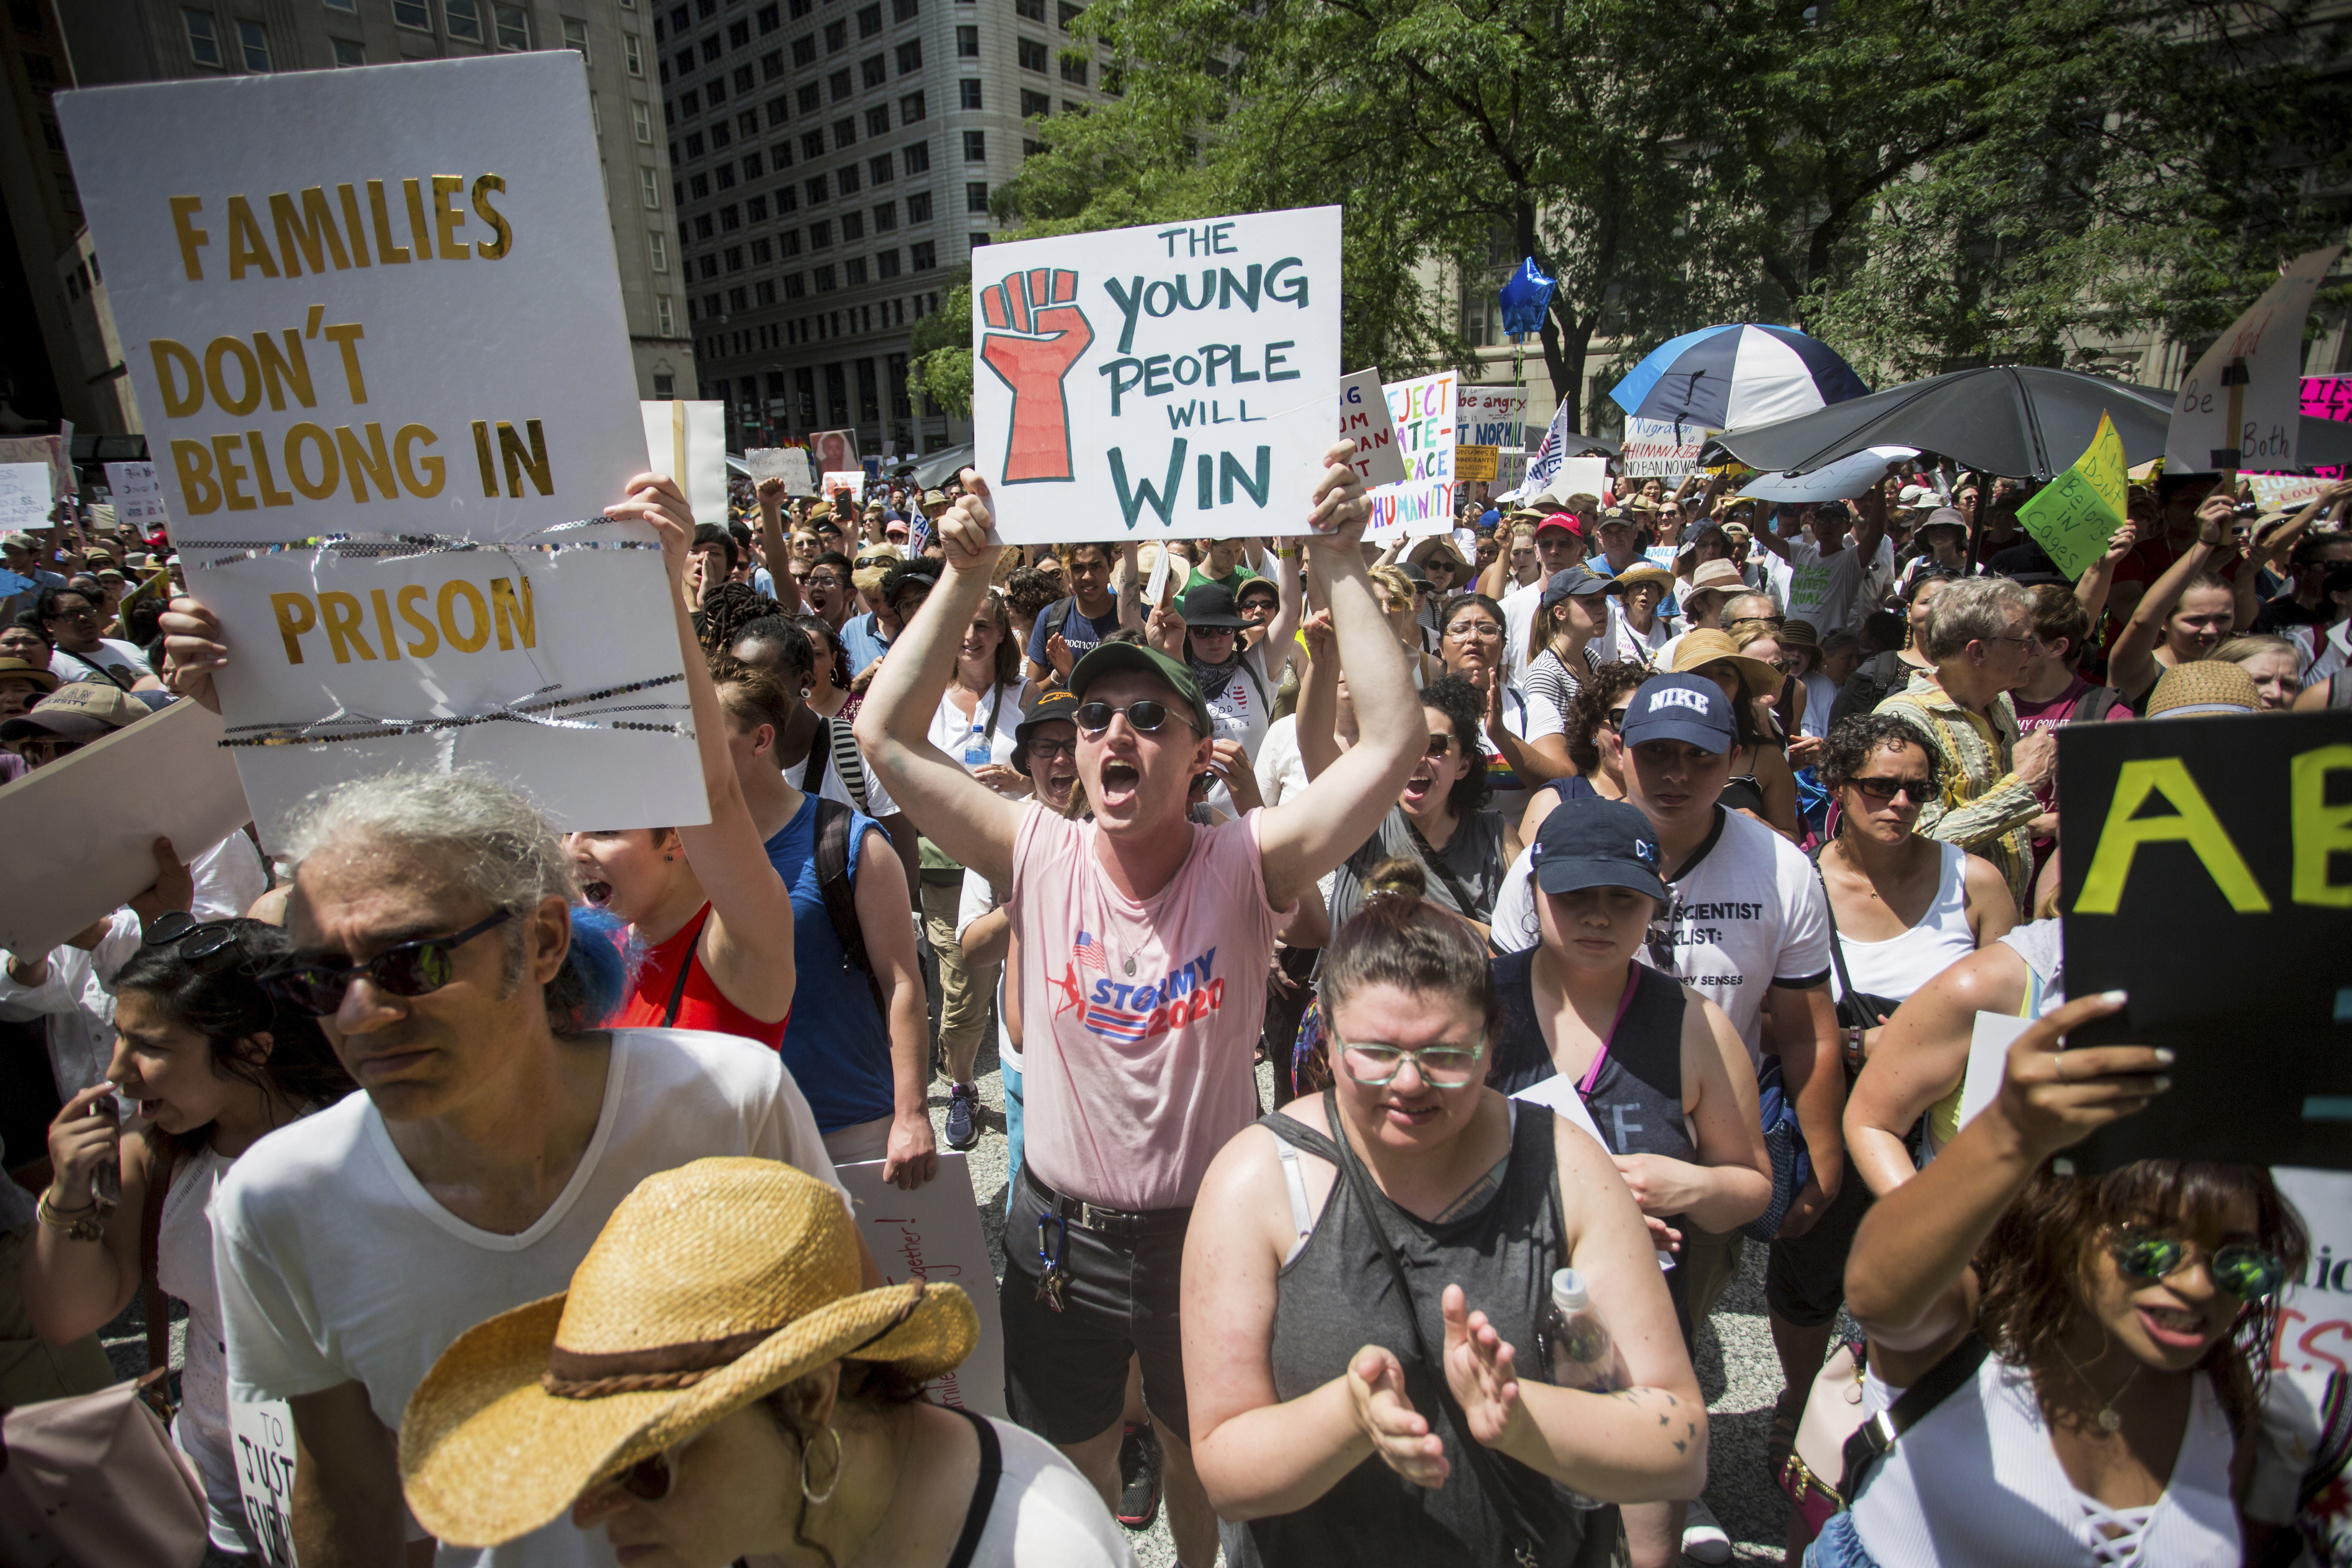 People hold signs as they participate in the Families Belong Together march in Chicago on Saturday, June 30, 2018. In major cities and tiny towns, marchers gathered across America, moved by accounts of children separated from their parents at the U.S.-Mexico border, in the latest act of mass resistance against President Donald Trump's immigration policies. (James Foster/Chicago Sun-Times via AP)